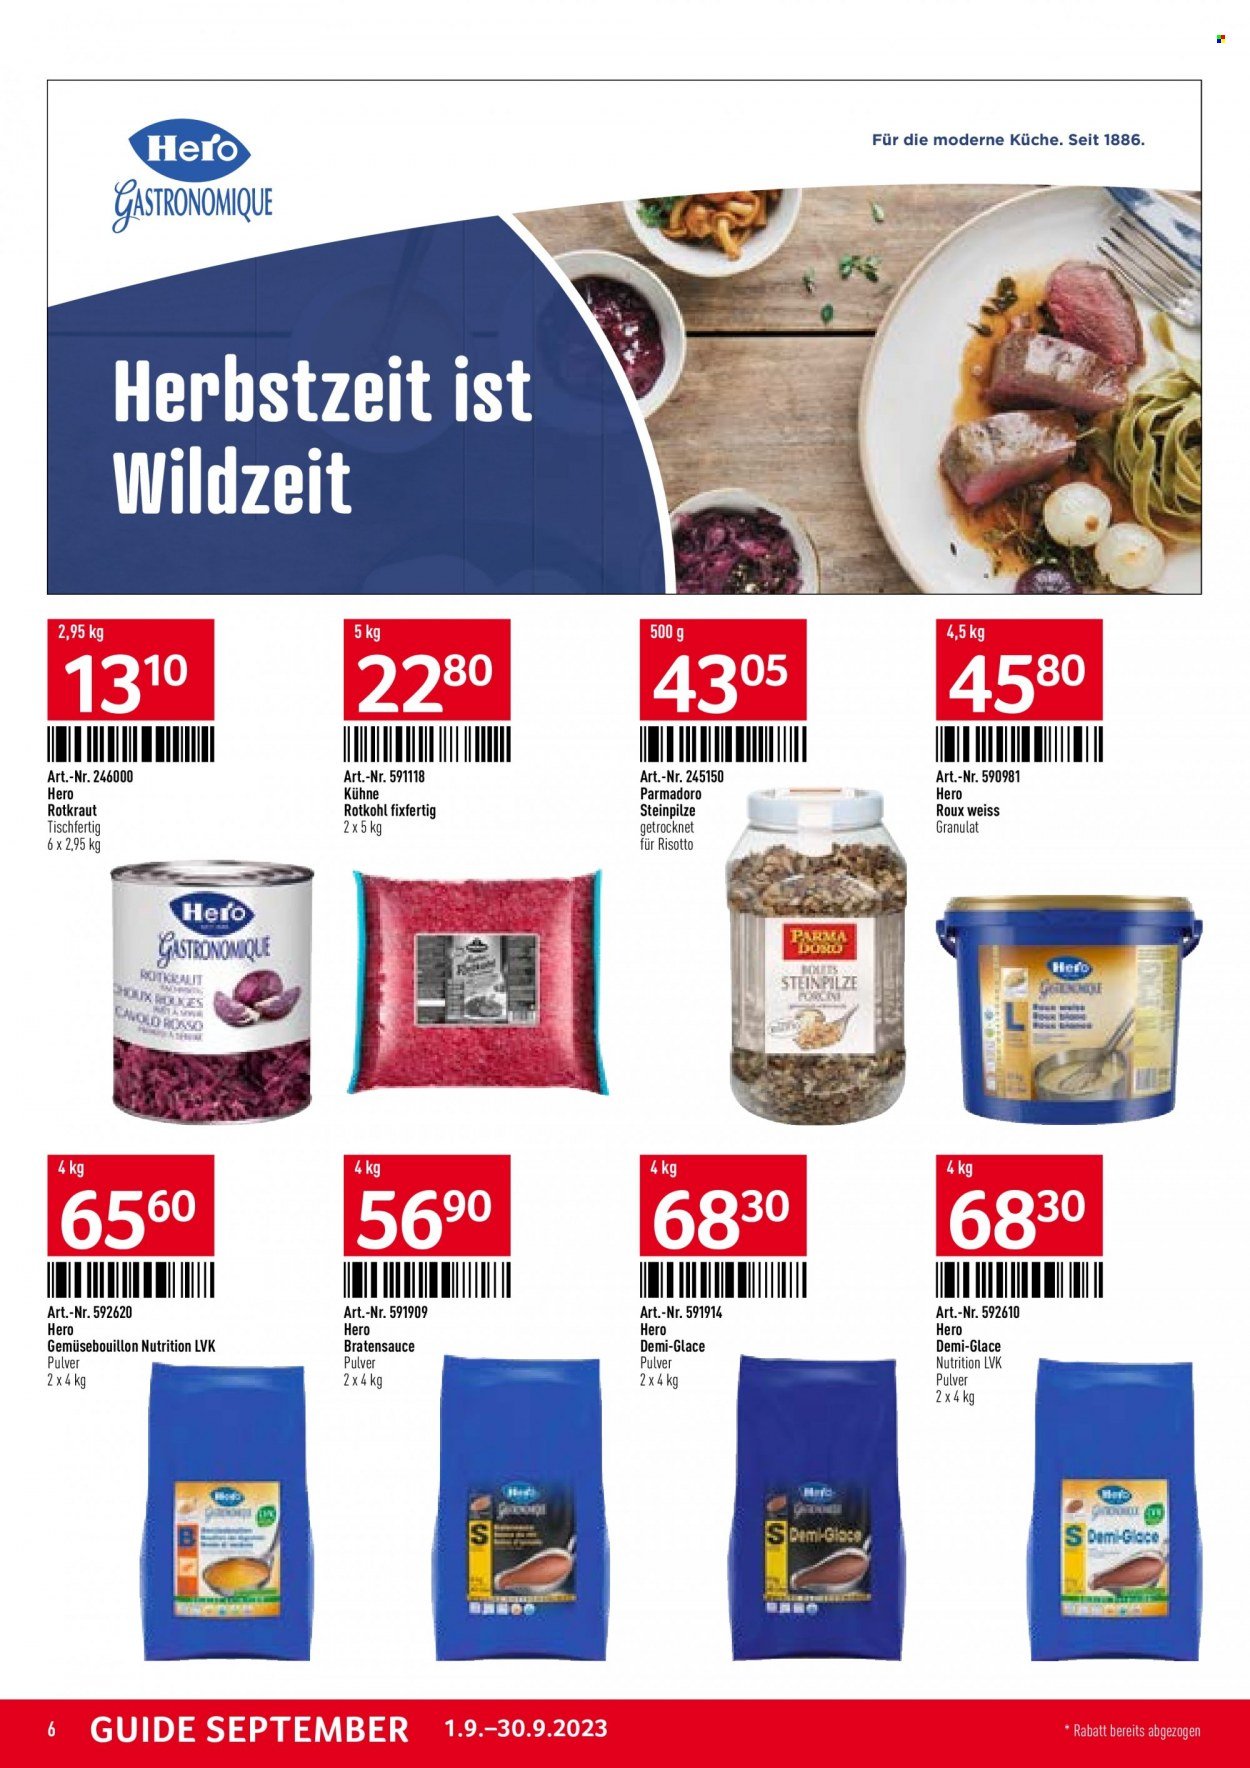 Catalogue TransGourmet - 1.9.2023 - 30.9.2023. Page 6.